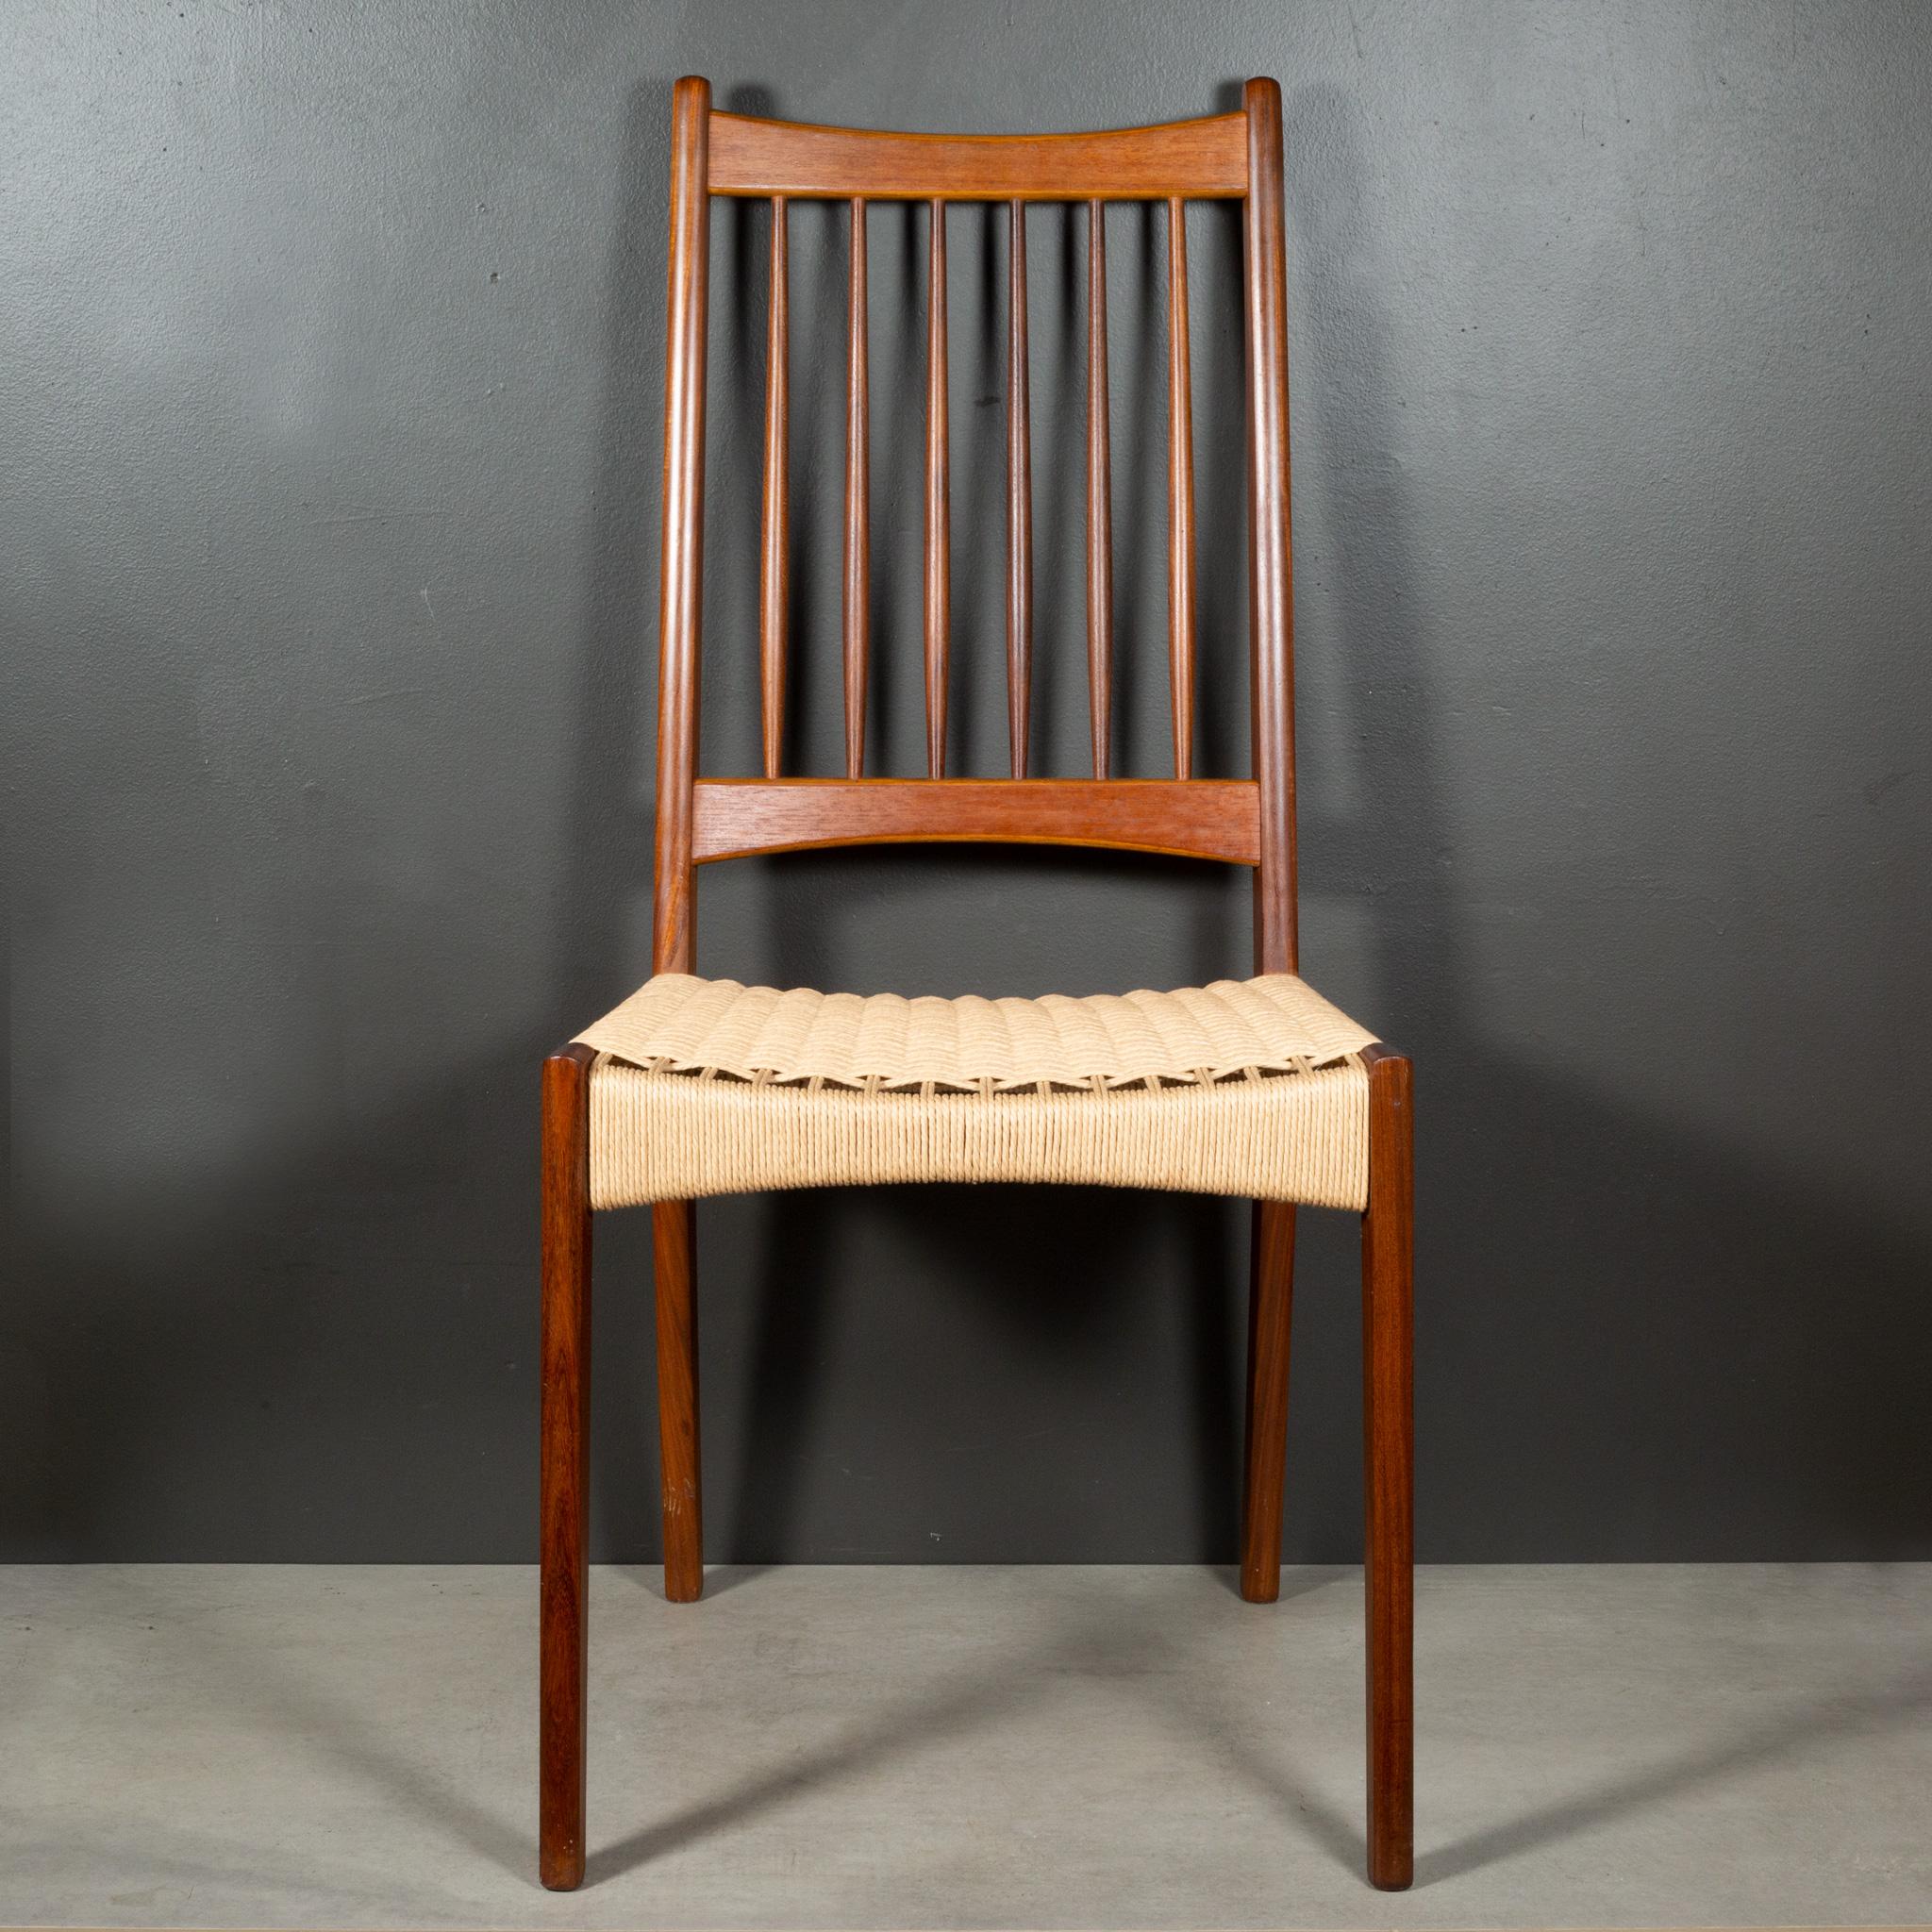 ABOUT

Contact us for more shipping quotes: S16 Home San Francisco. 

A set of six mid-century rail back Teak and Danish paper cord dining chairs designed by Arne Hovmand-Olsen and produced by Mogens Kold.

Each chair has all new, handwoven paper